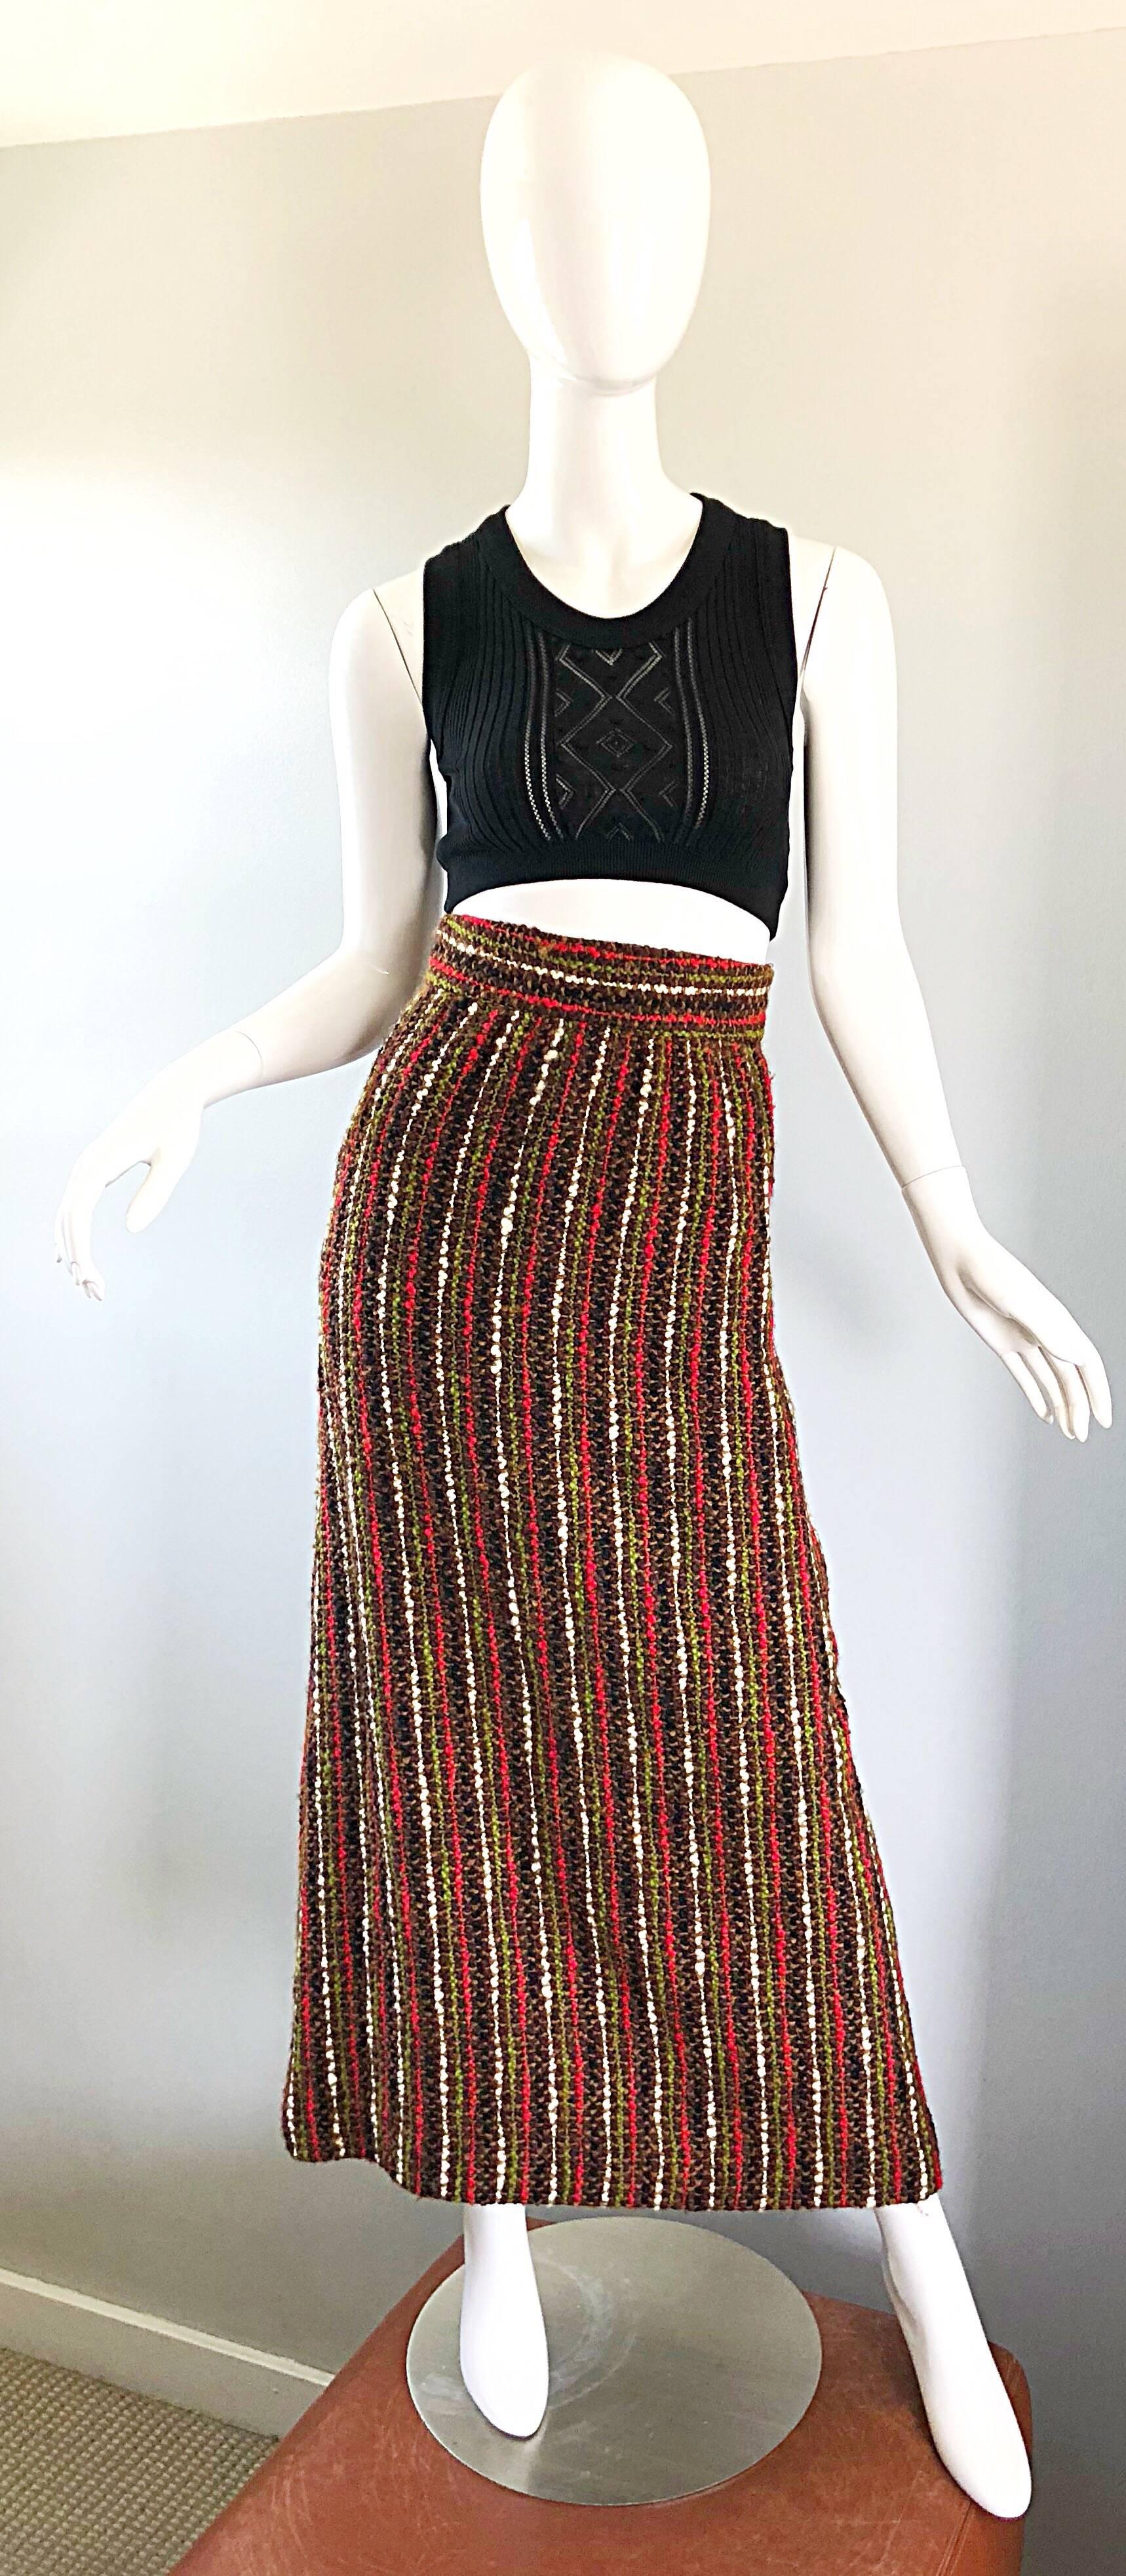 Chic 1970s high waisted soft boucle woven maxi skirt! Features warm hues of olive chartreuse green, brown and red stripes throughout. High quality, and very finely constructed. Hidden metal zipper up th eback with hook-and-eye closure. Fully lined.